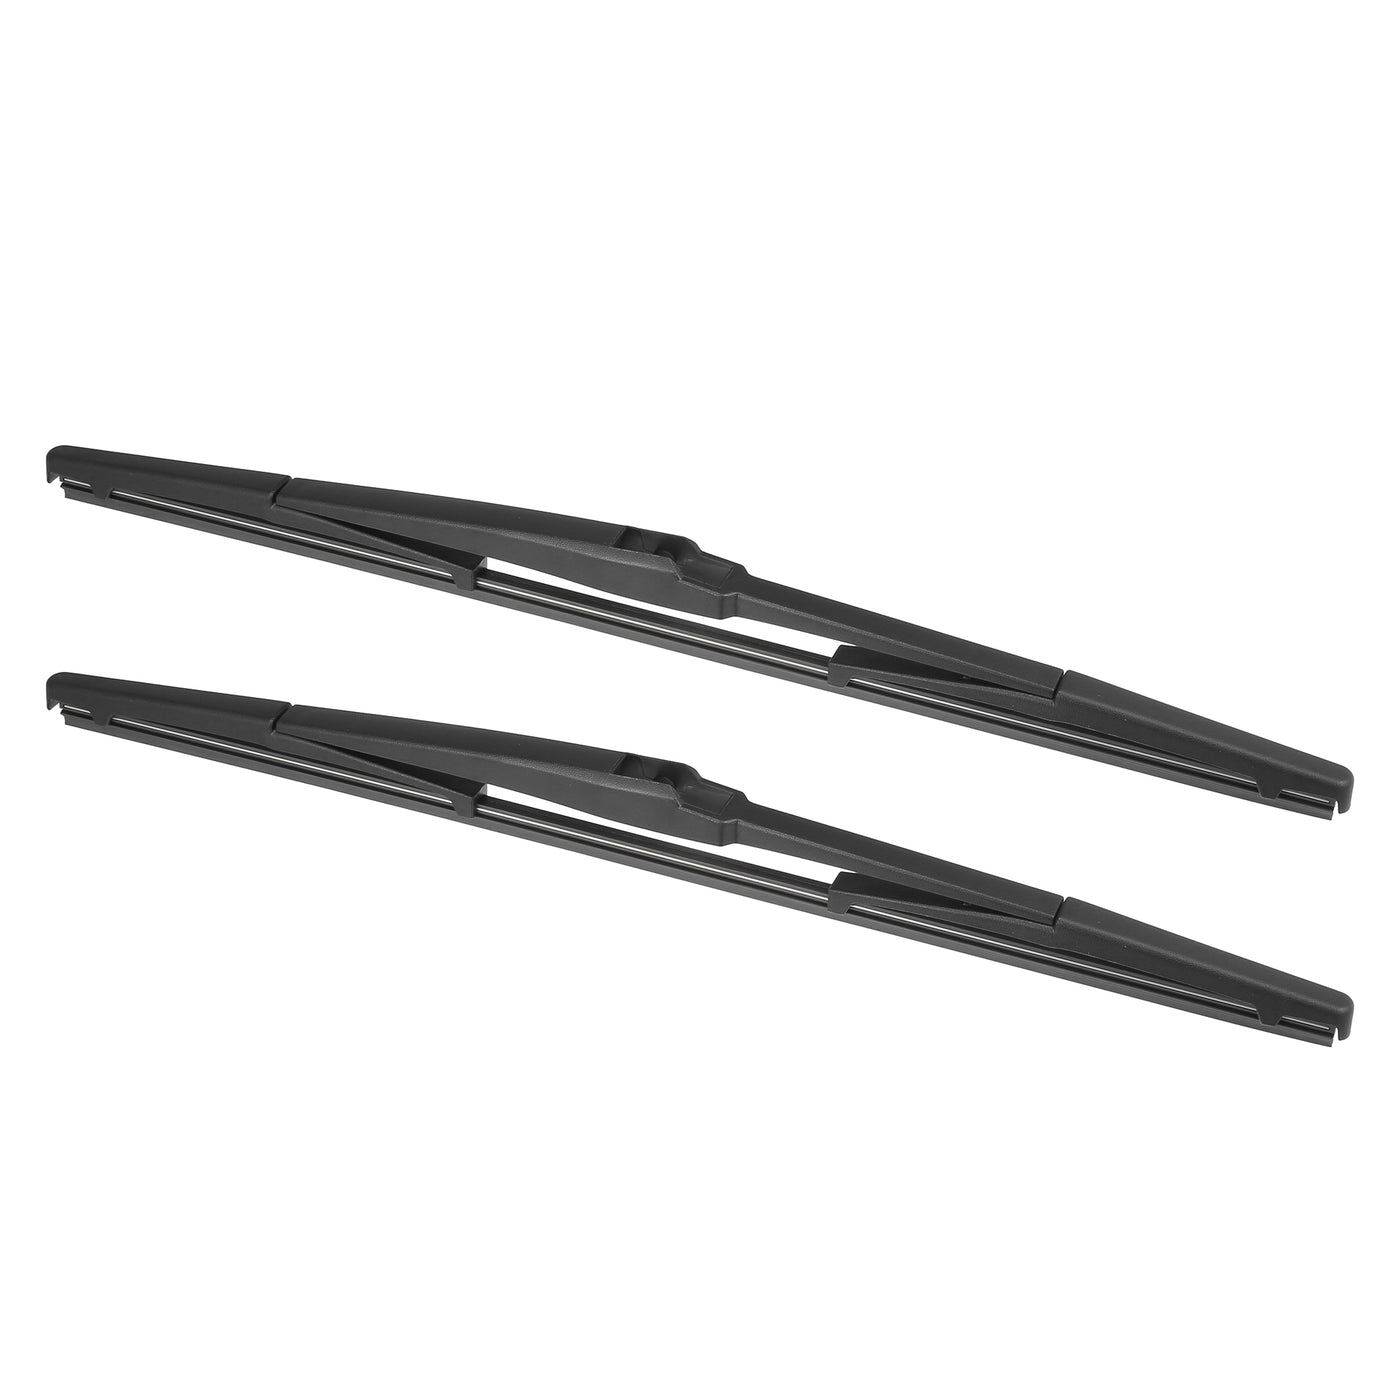 X AUTOHAUX 2pcs Rear Windshield Wiper Blade Replacement for Toyota Prius 2005-2014 for Lexus RX350 2008-2016 for Hyundai Entourage 2009-2010